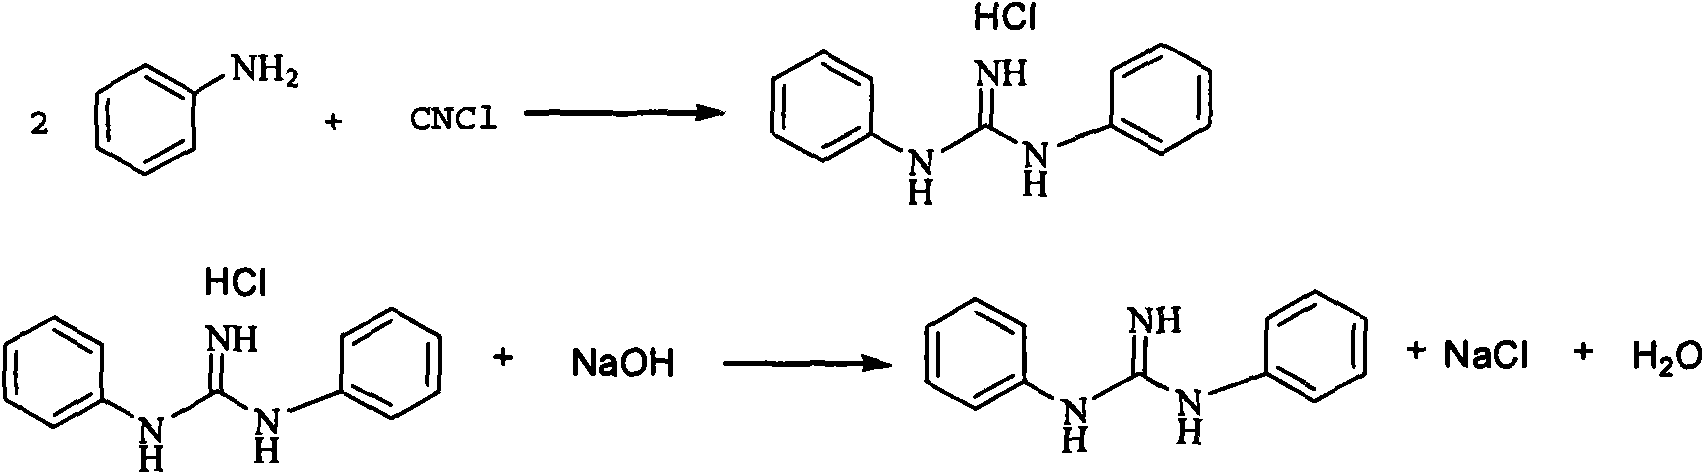 Process route for continuously synthesizing diphenylguanidine